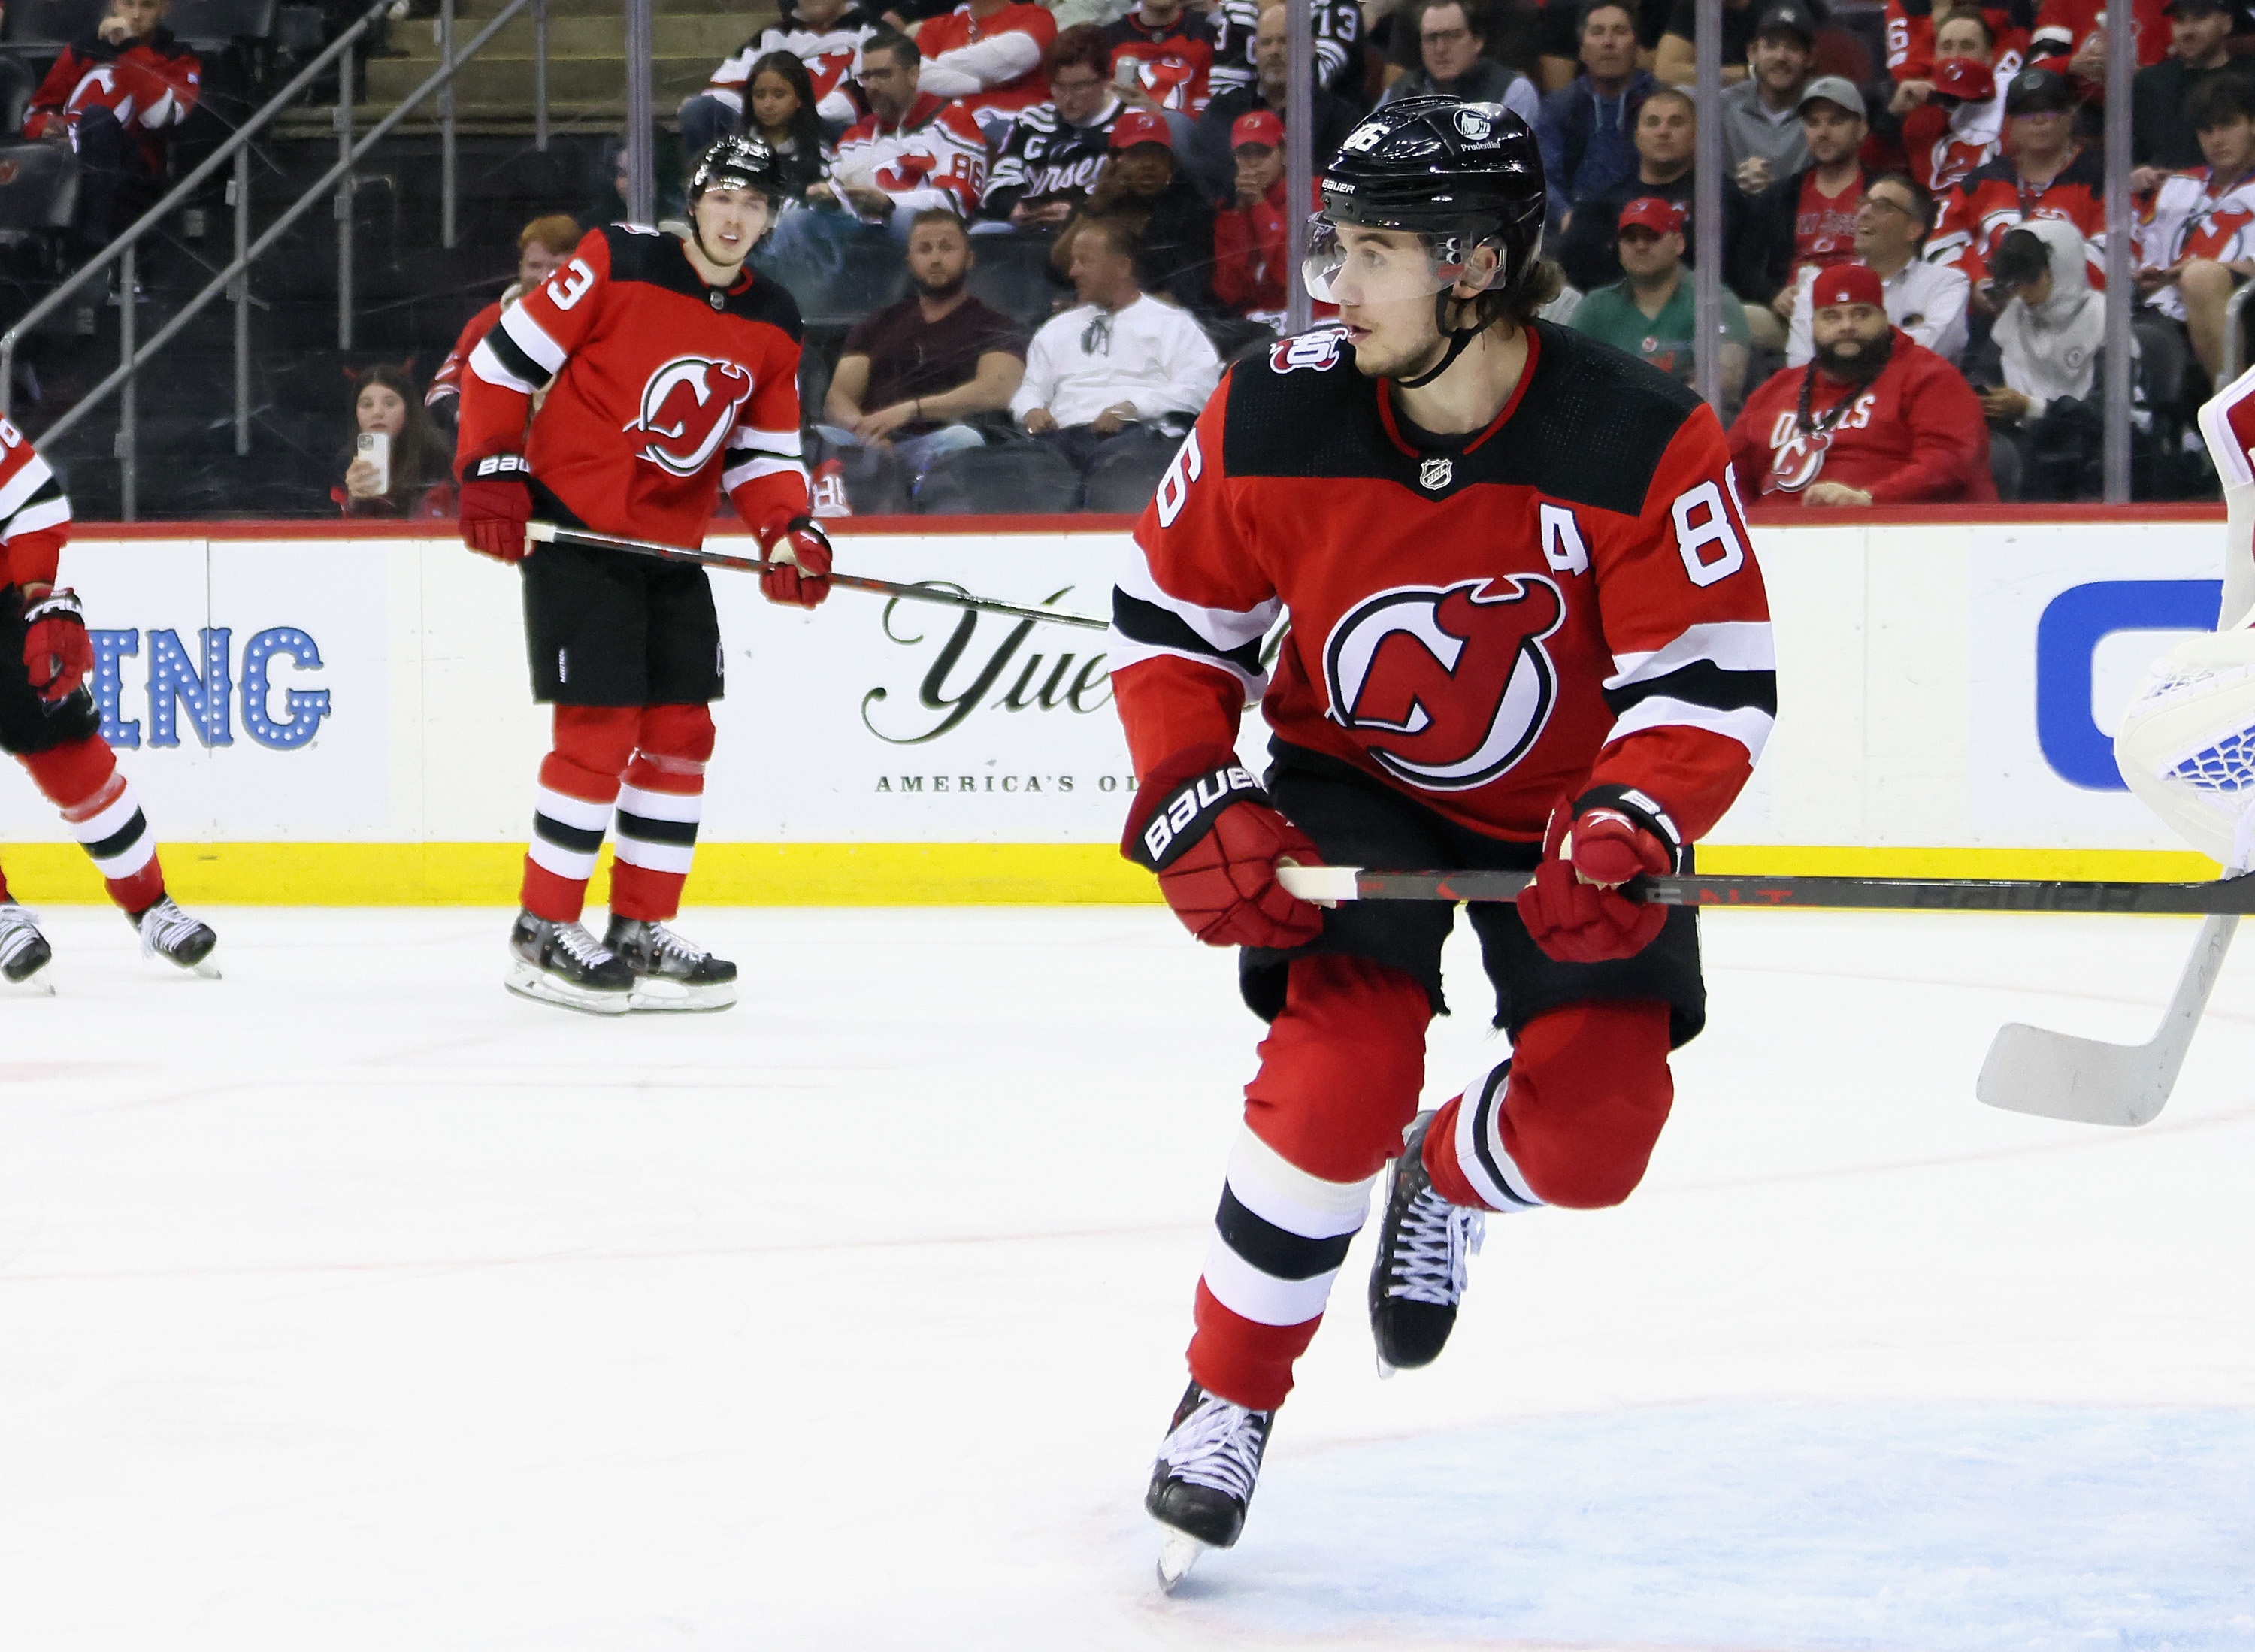 Luke Hughes #43 and Jack Hughes #86 of the New Jersey Devils skate against the Carolina Hurricanes in Game Four of the Second Round of the 2023 Stanley Cup Playoffs at Prudential Center on May 09, 2023 in Newark, New Jersey.